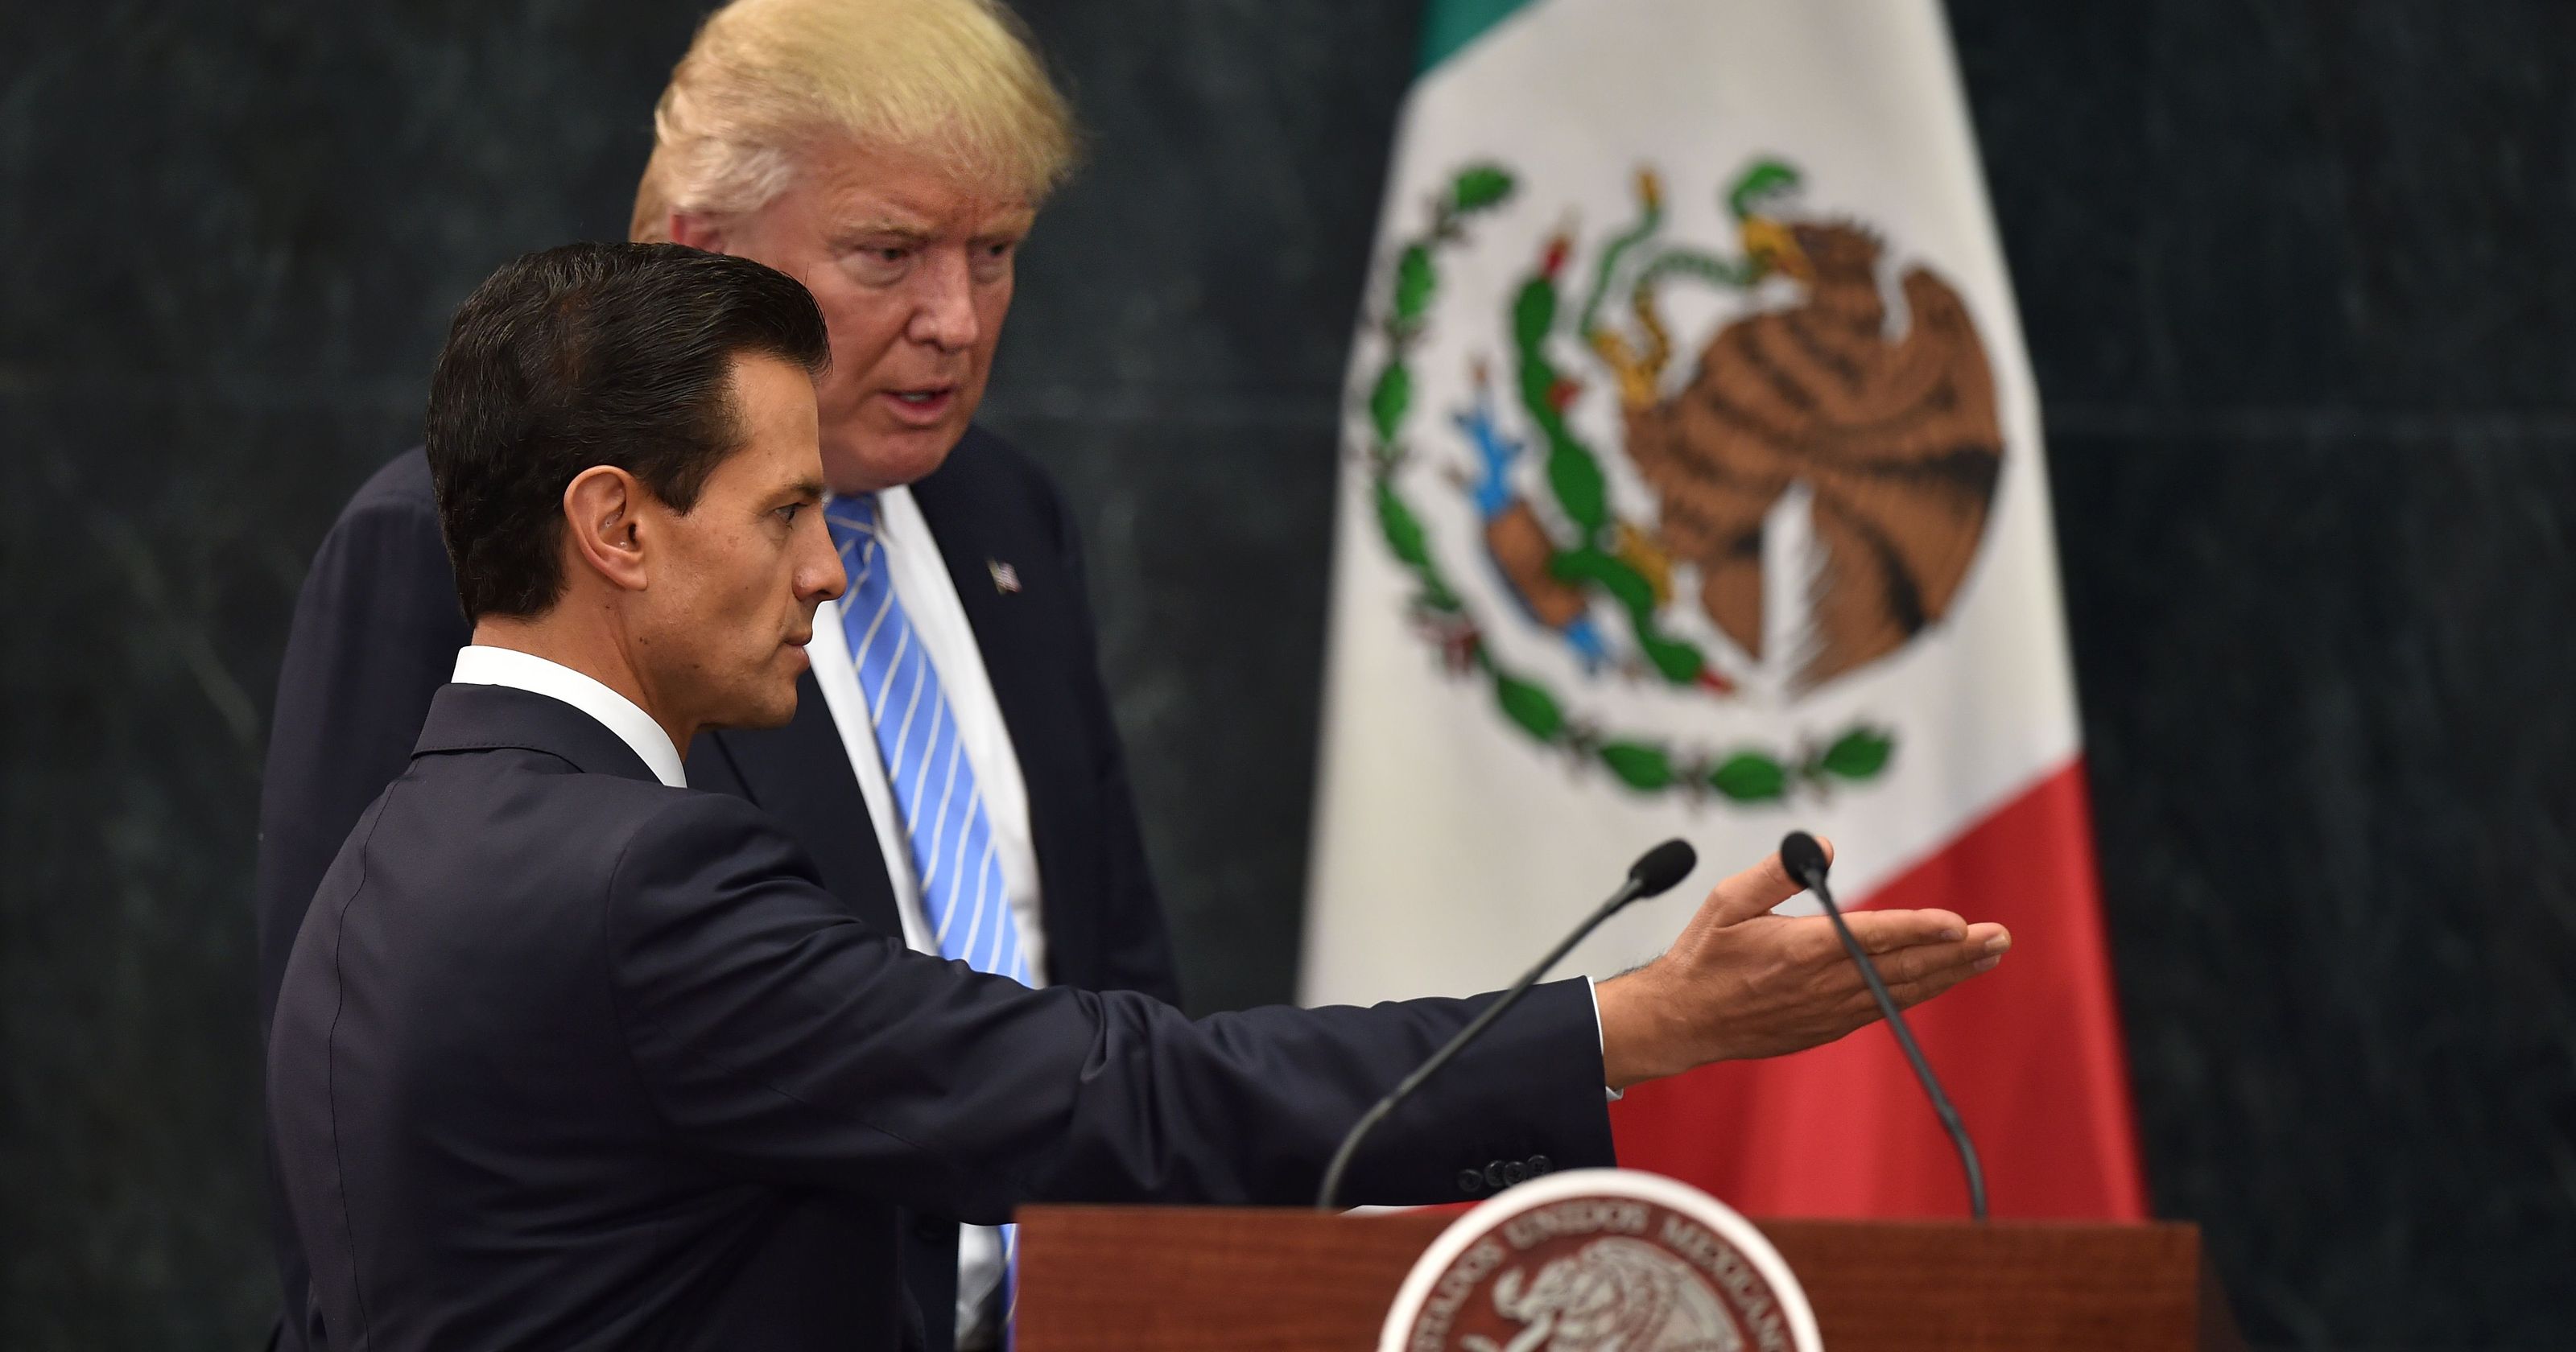 Mexico president says Trump visit could have been done better